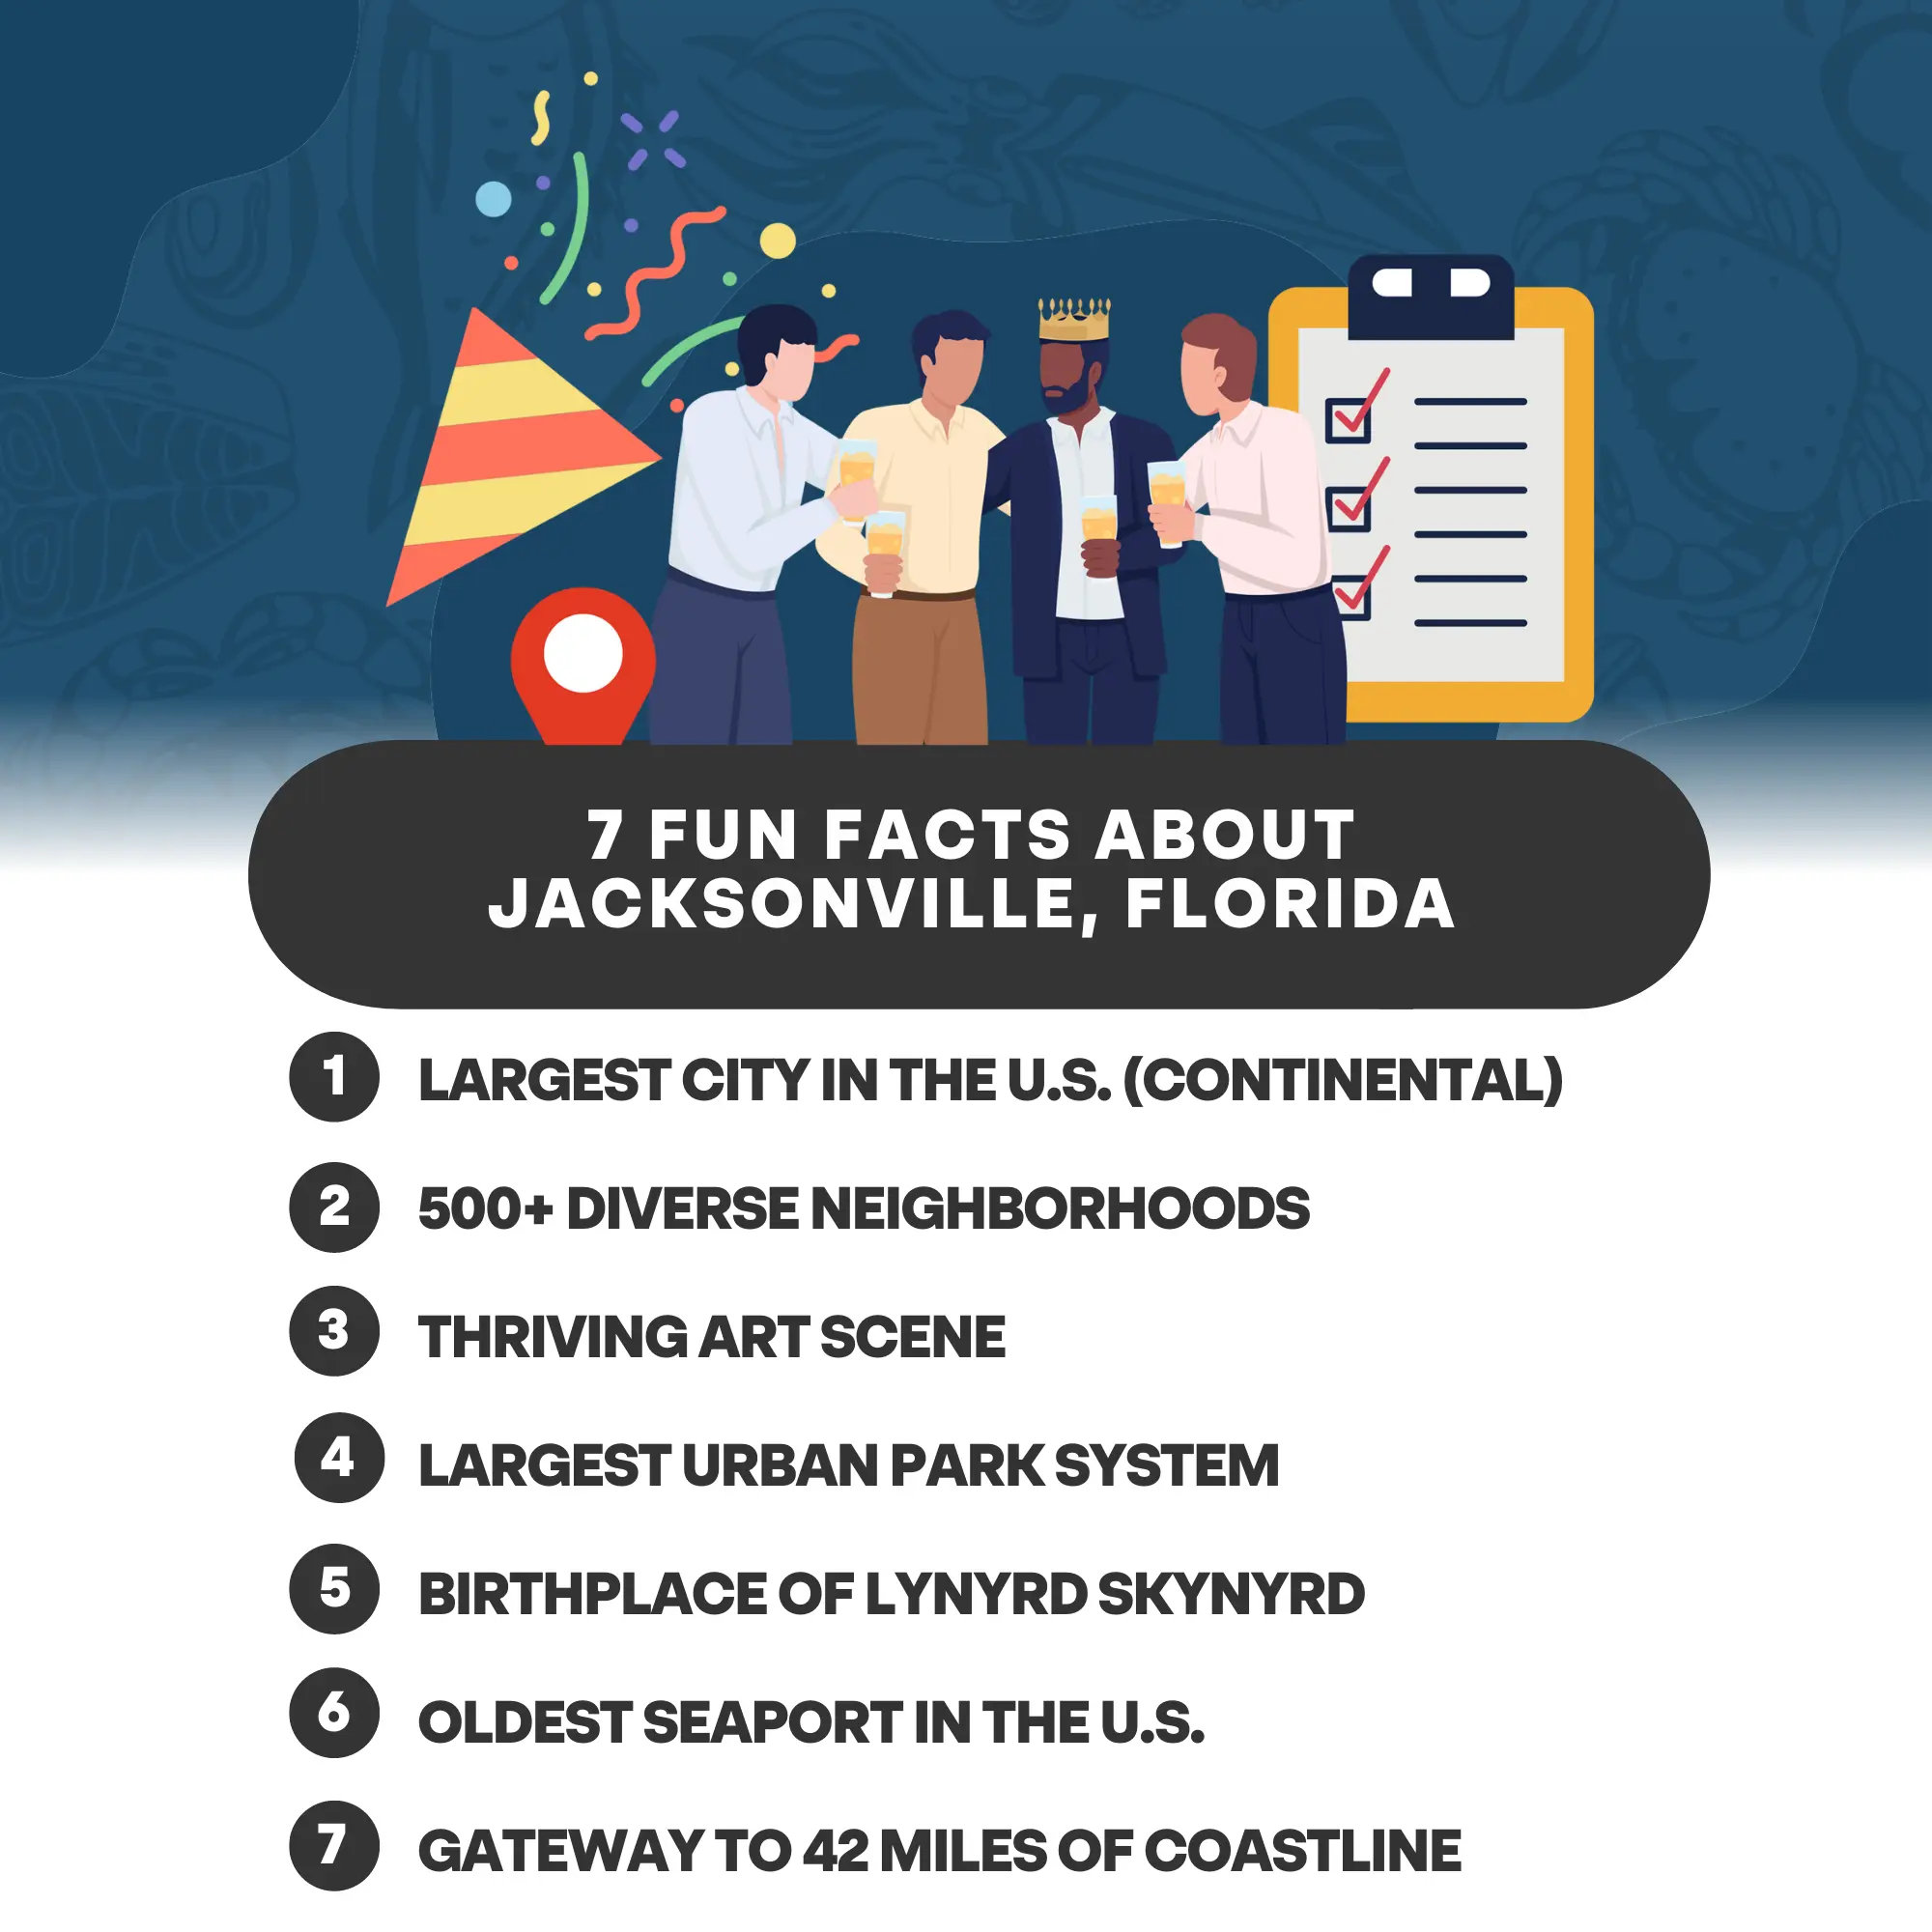 7 Fun Facts About Jacksonville Florida